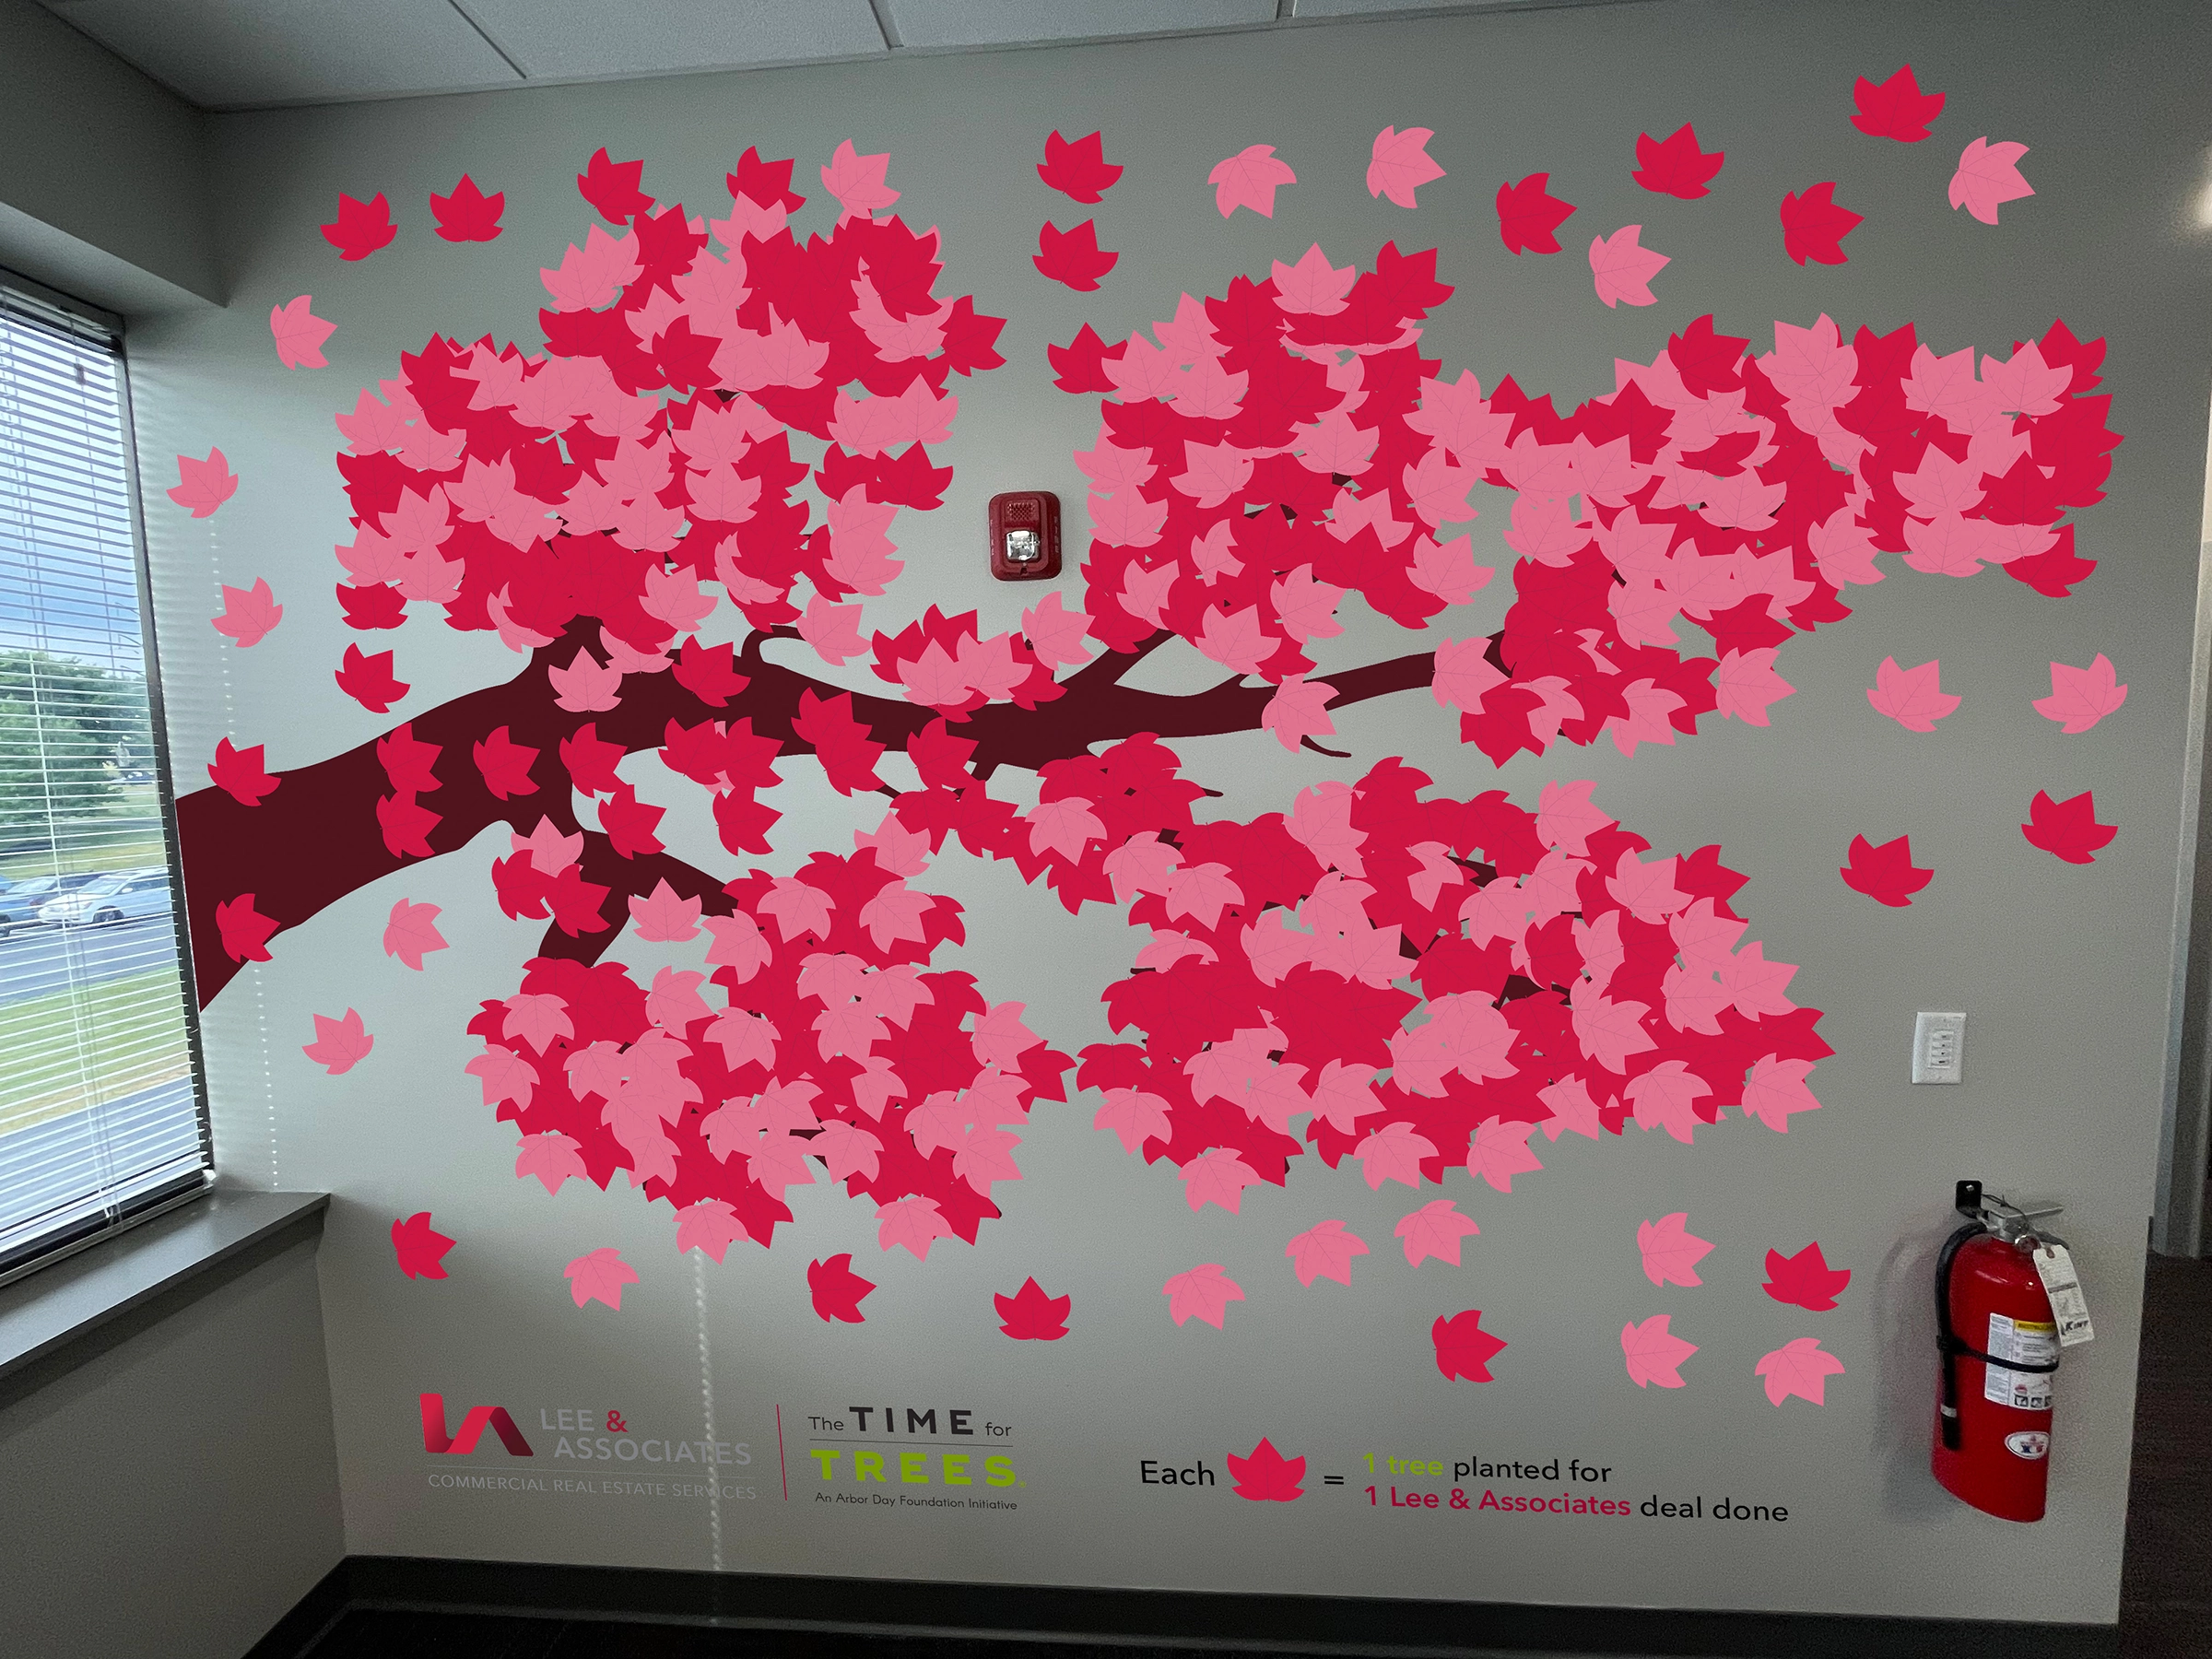 Wall graphic showing leaves being placed for each tree planted for each commercial deal done